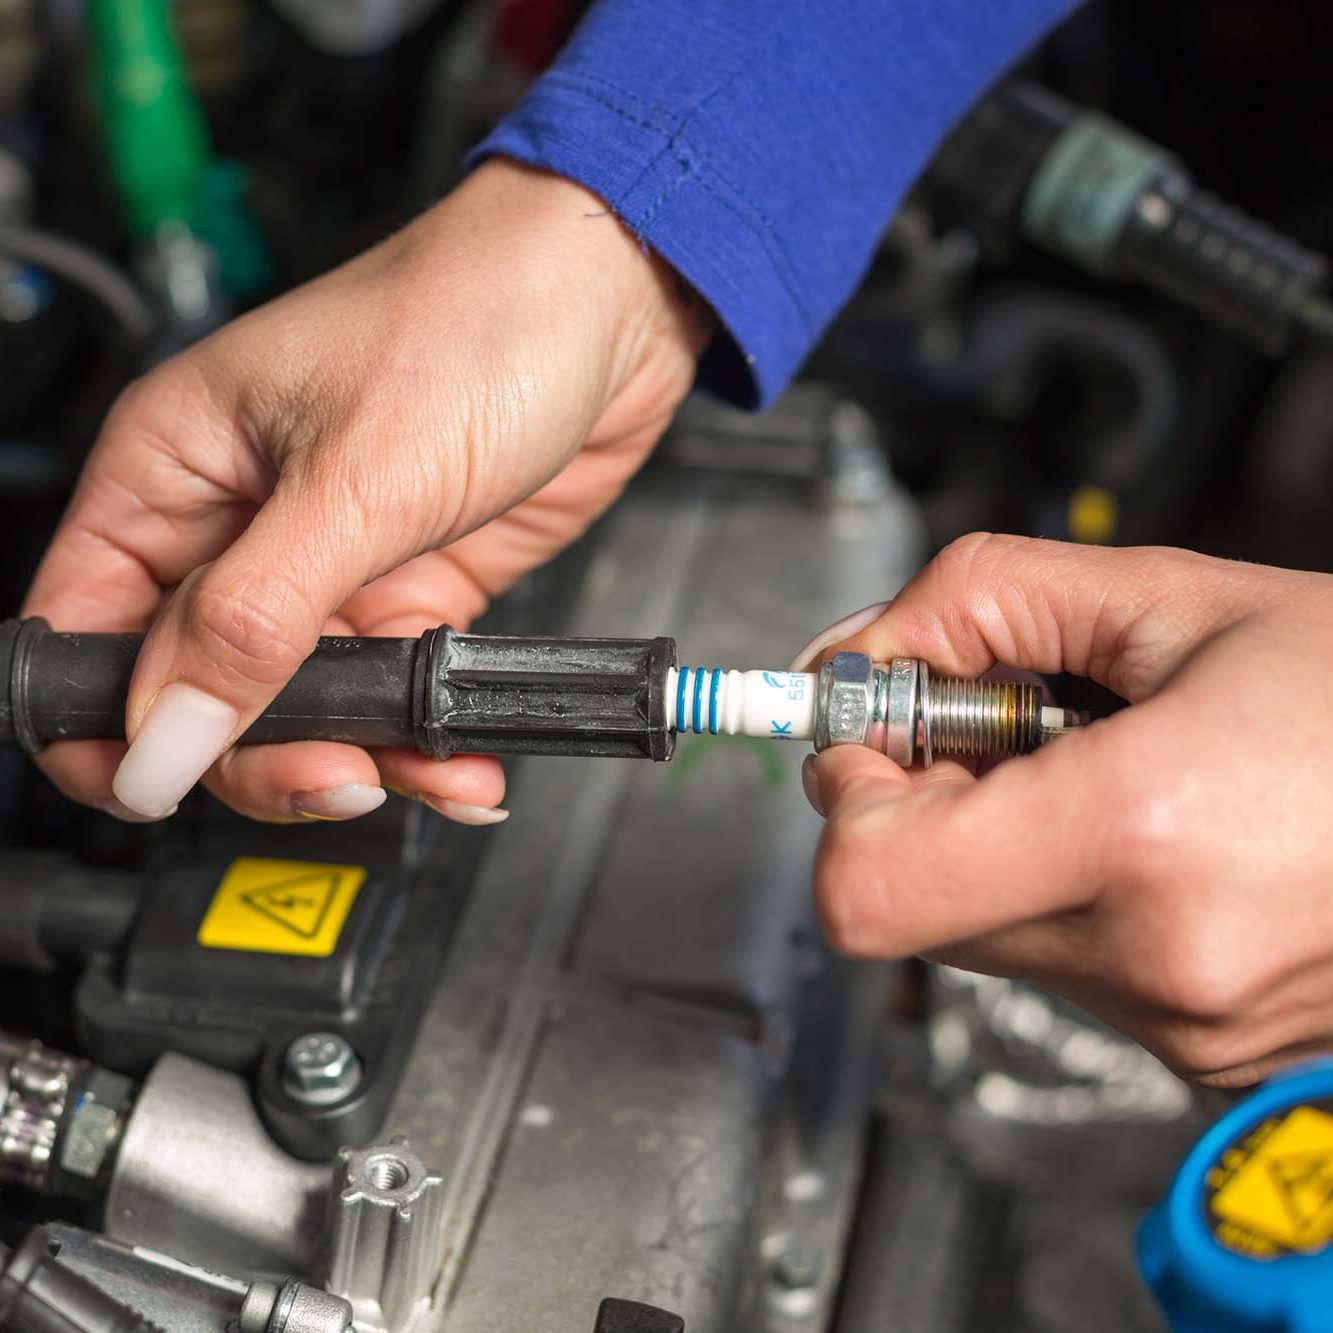 A car mechanic changing spark plugs